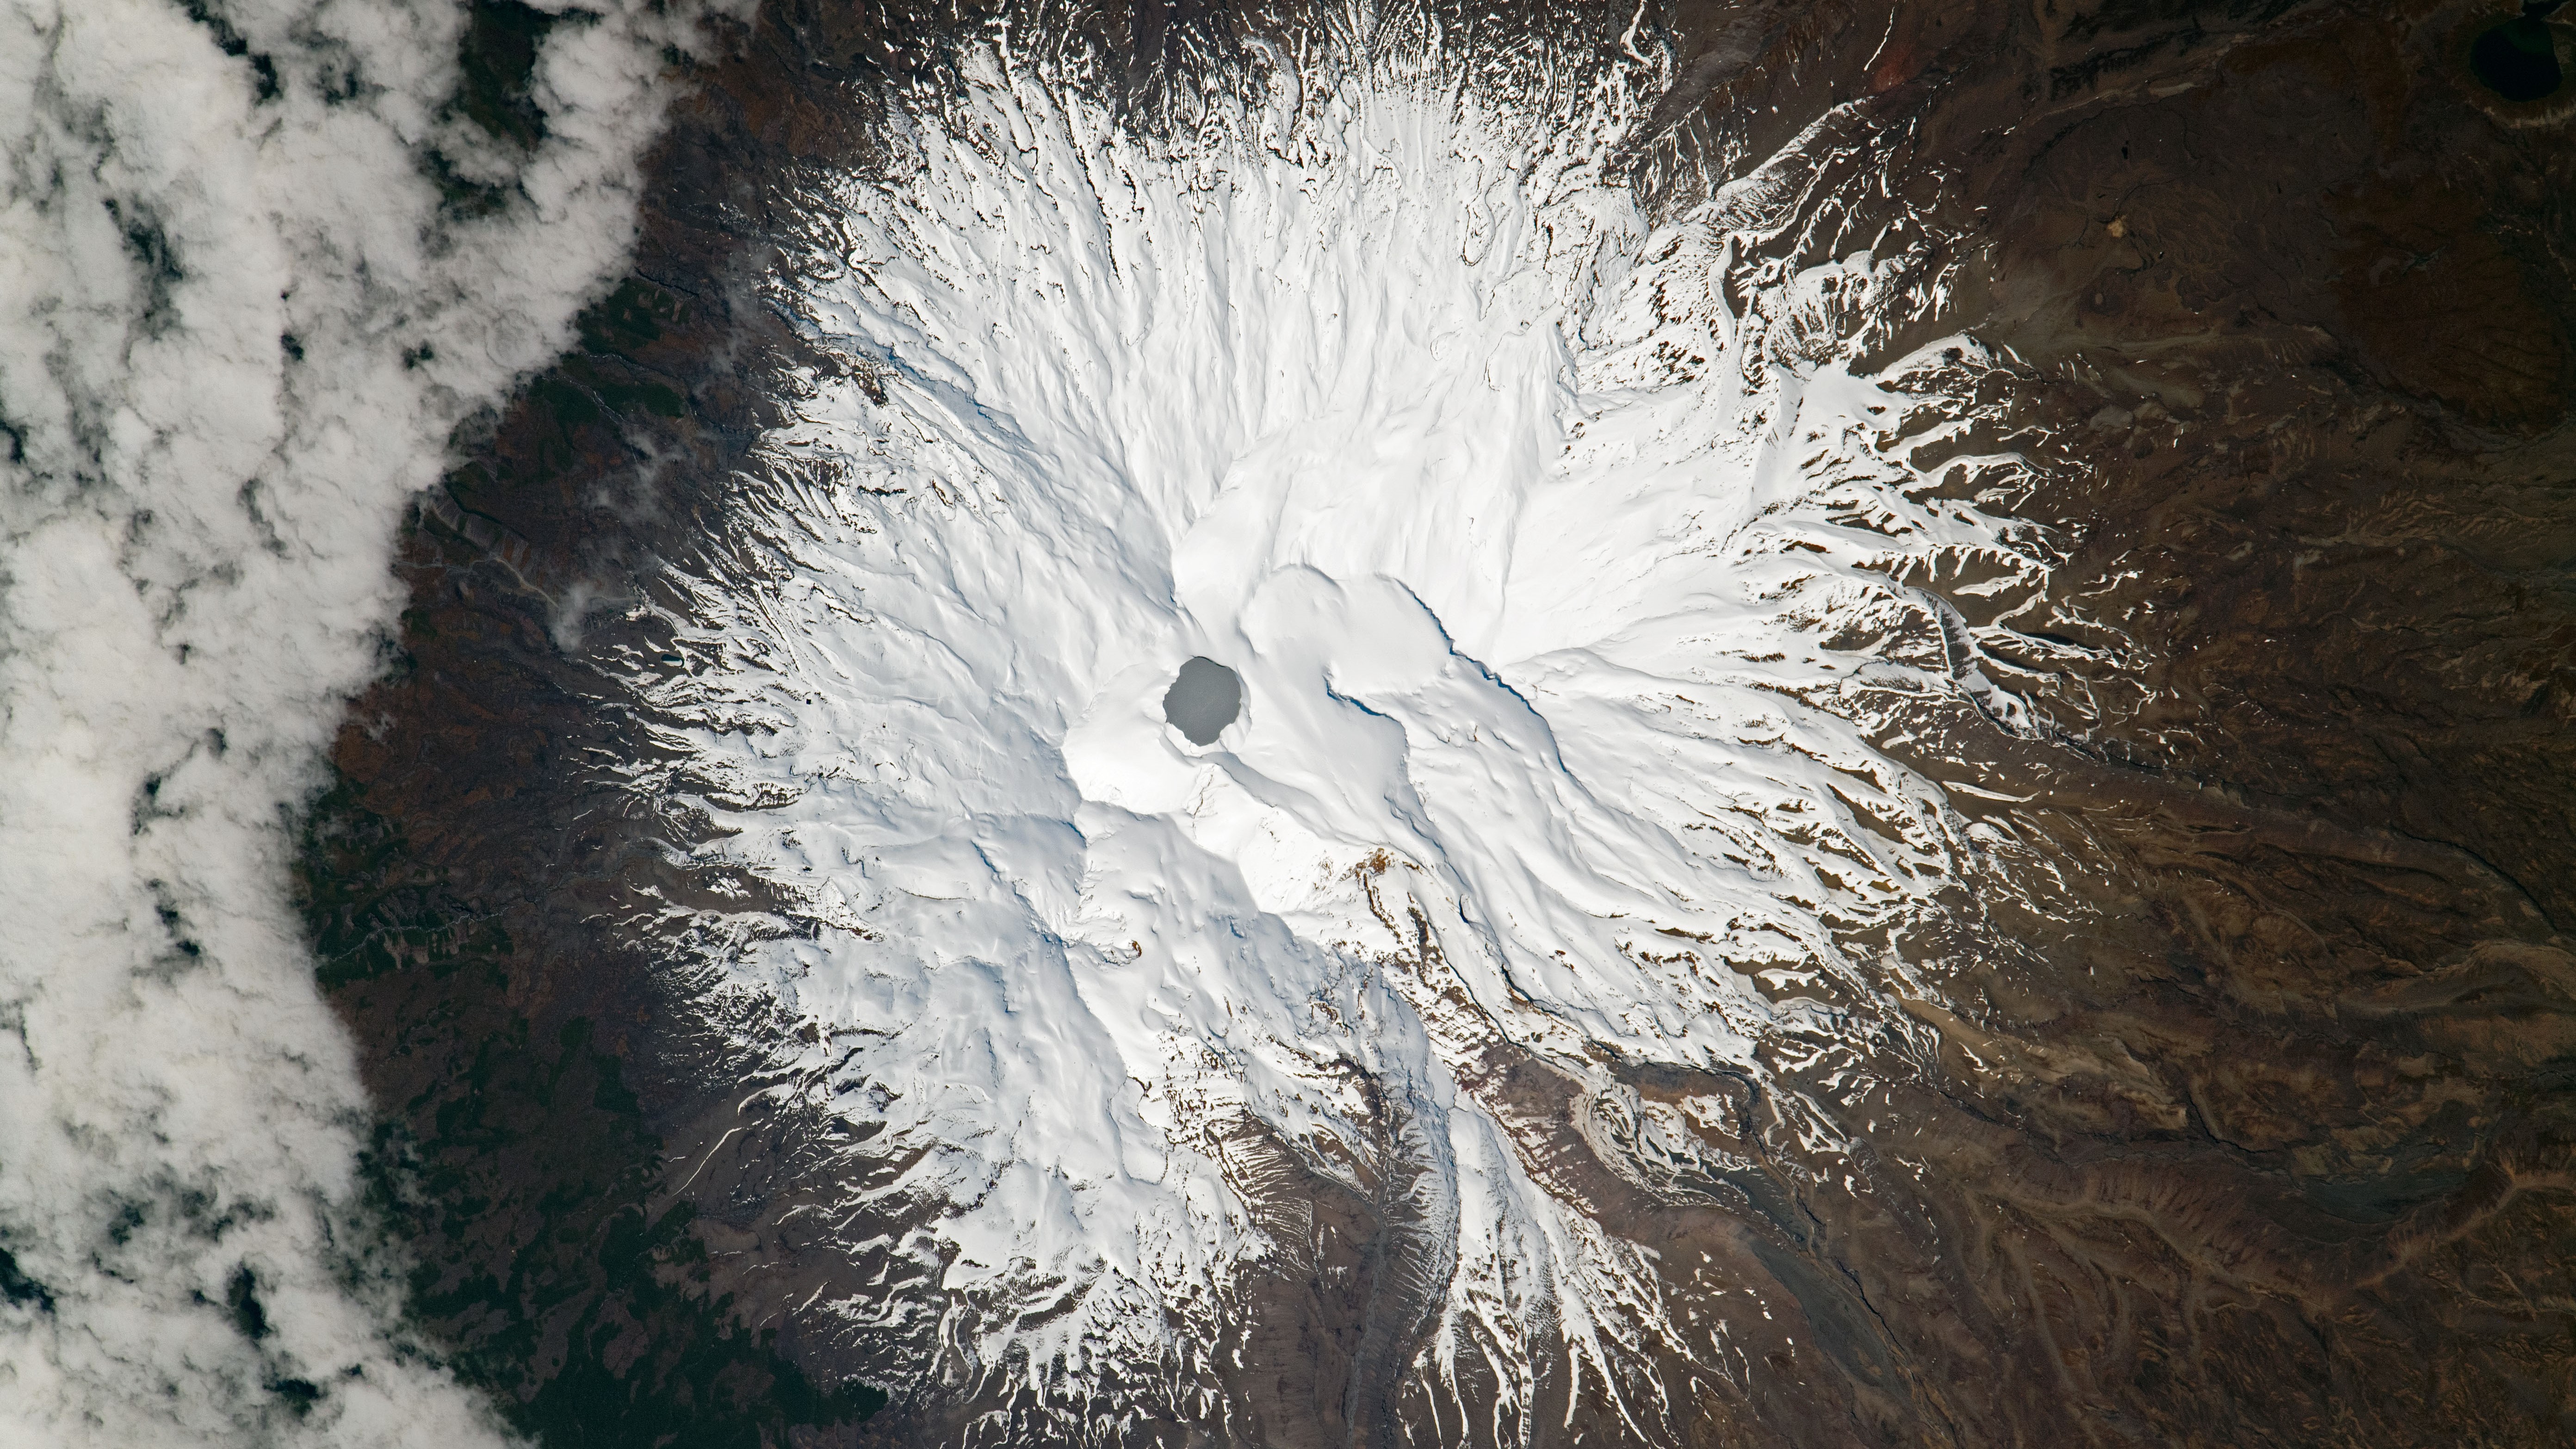 An astronaut photograph of Mount Ruapehu taken on Sept. 23, 2021. The highly acidic hydrothermal lake, known as Crater Lake, can be seen at the summit of the active stratovolcano.